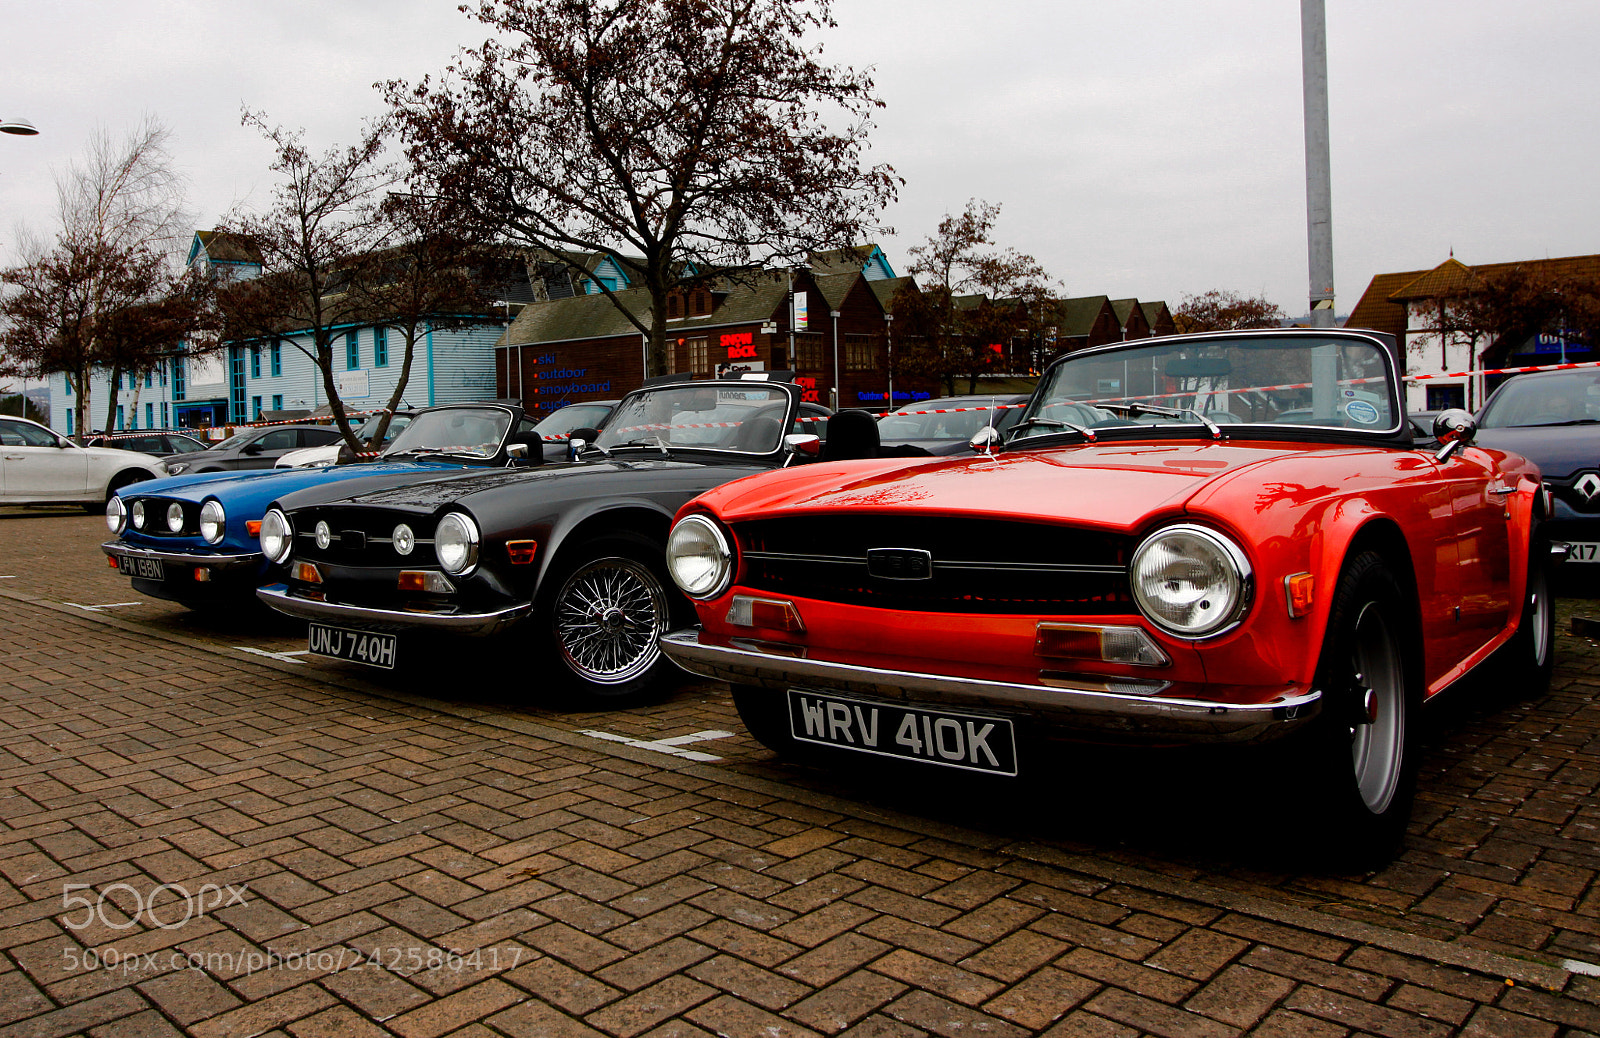 Canon EOS 50D sample photo. Classic tr6's at the photography